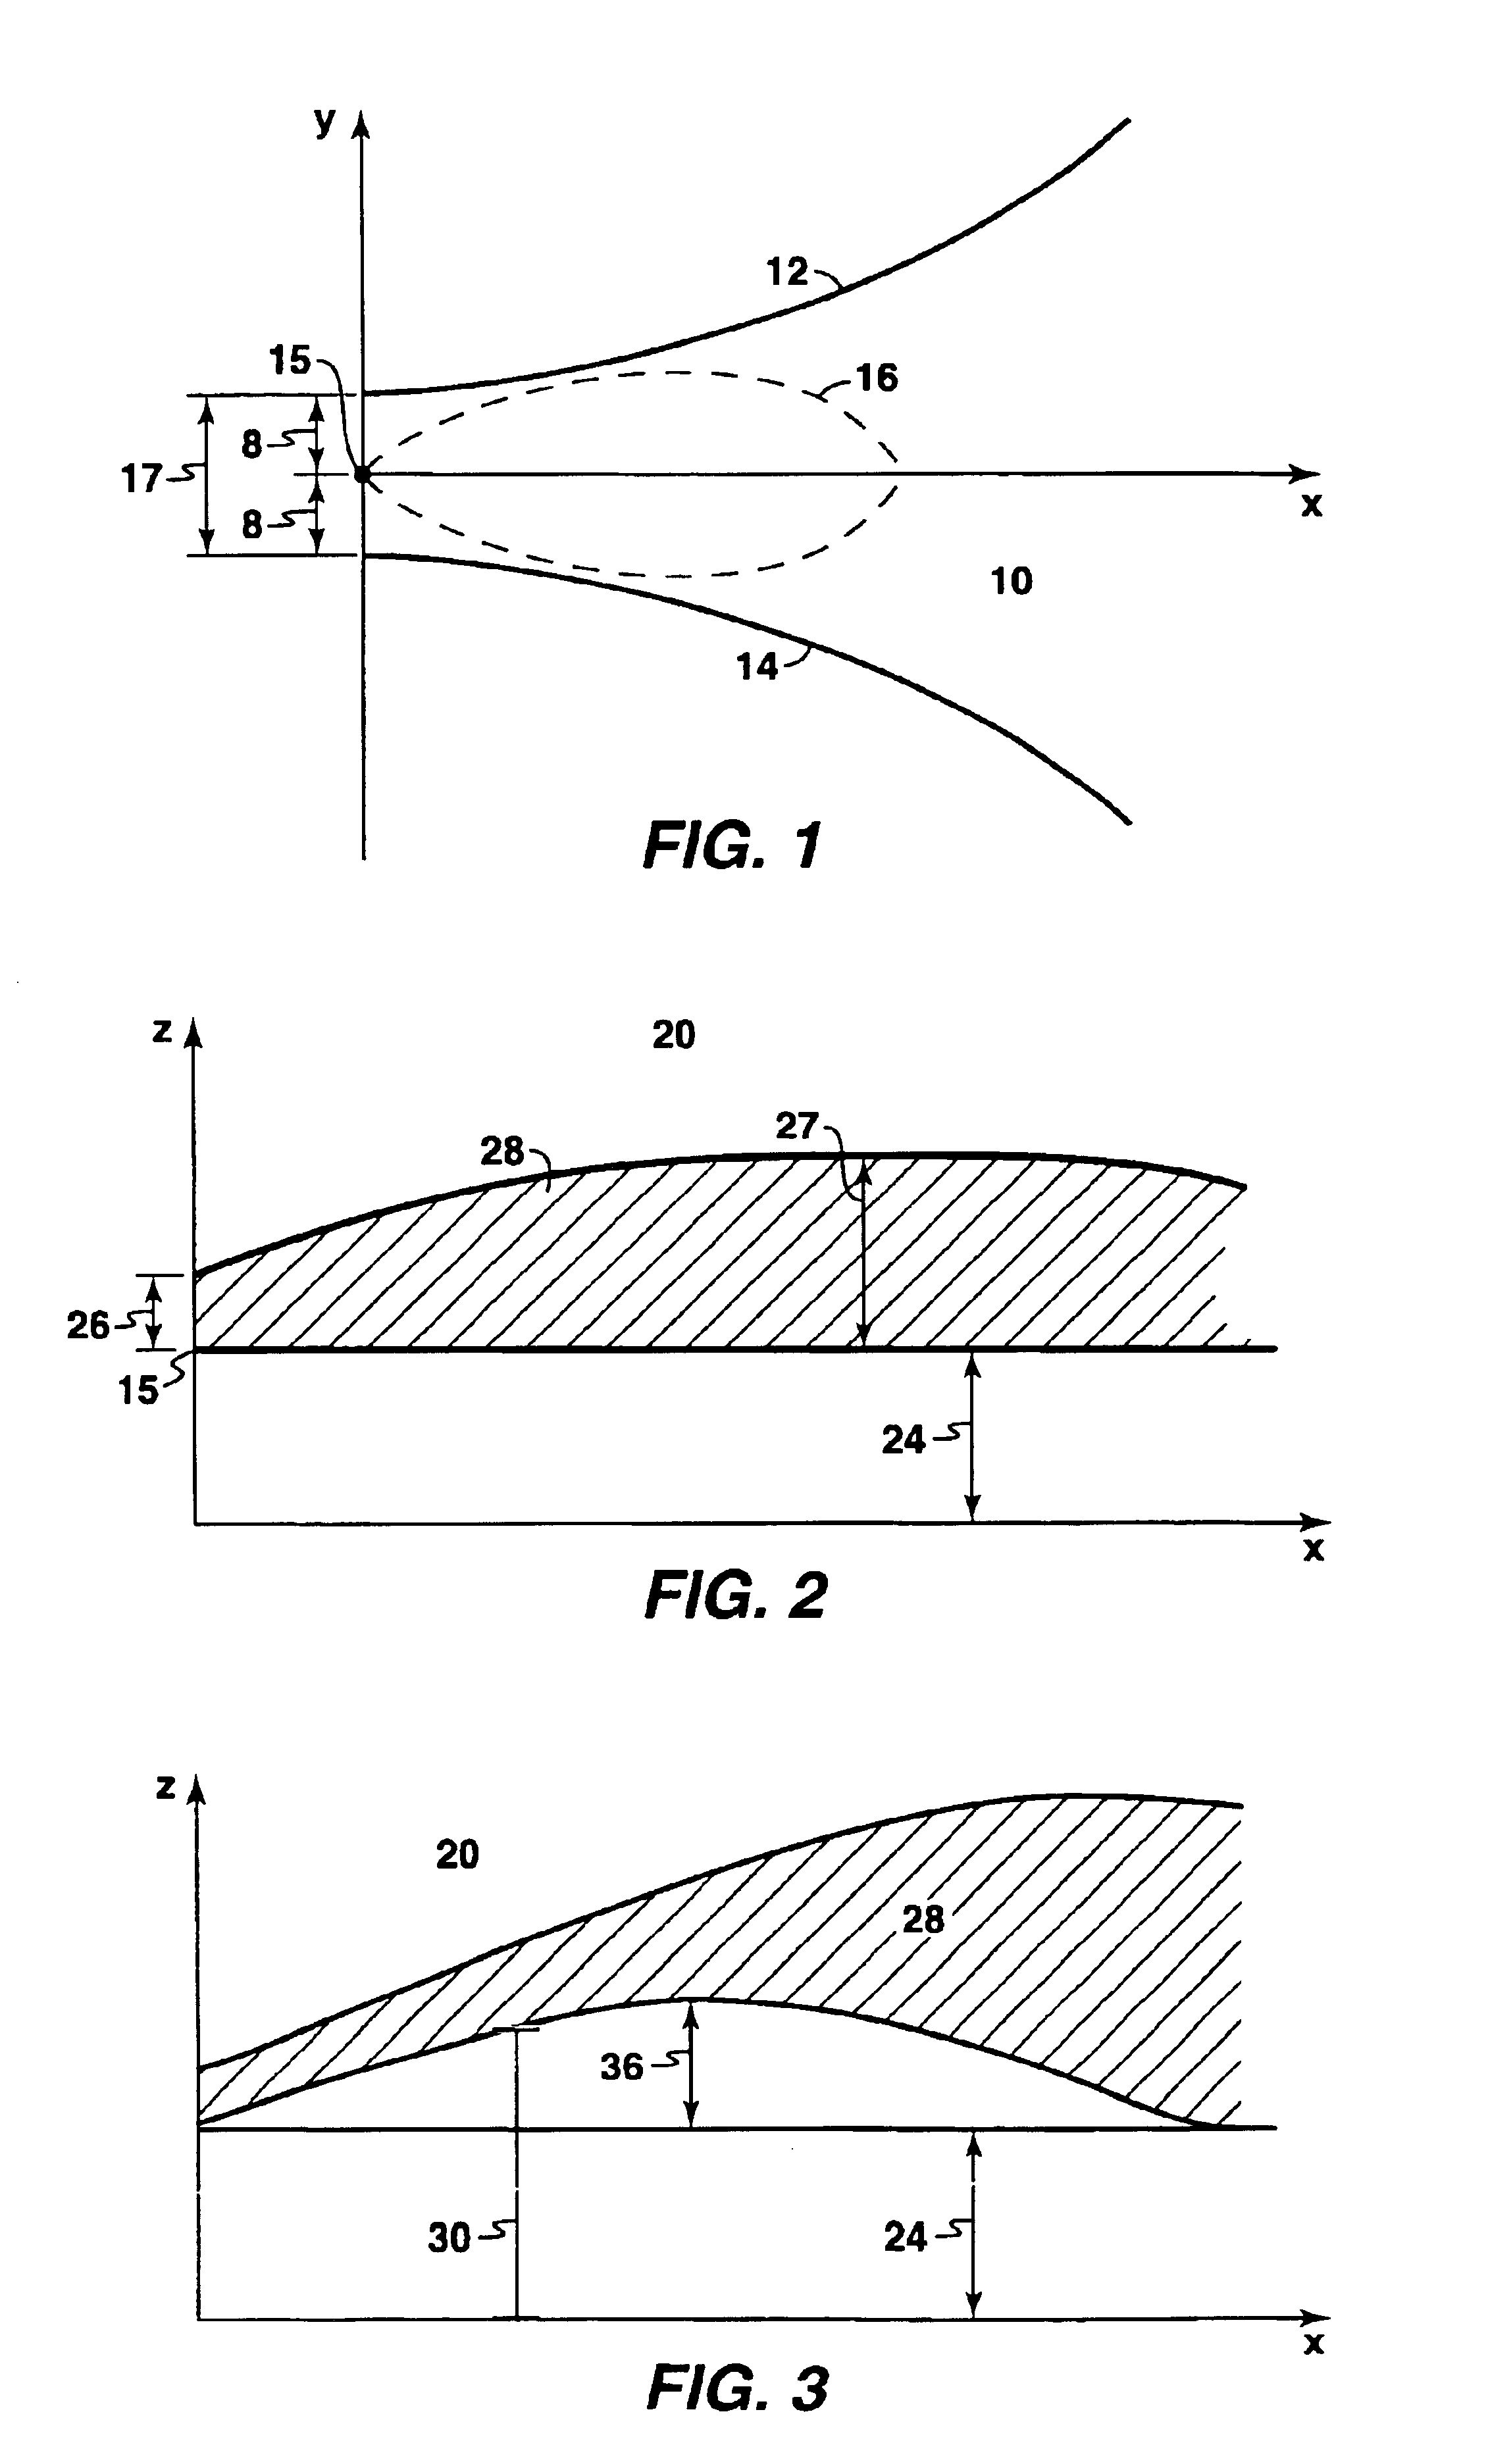 Method for predicting properties of a sedimentary deposit from a thickness contour of the deposit